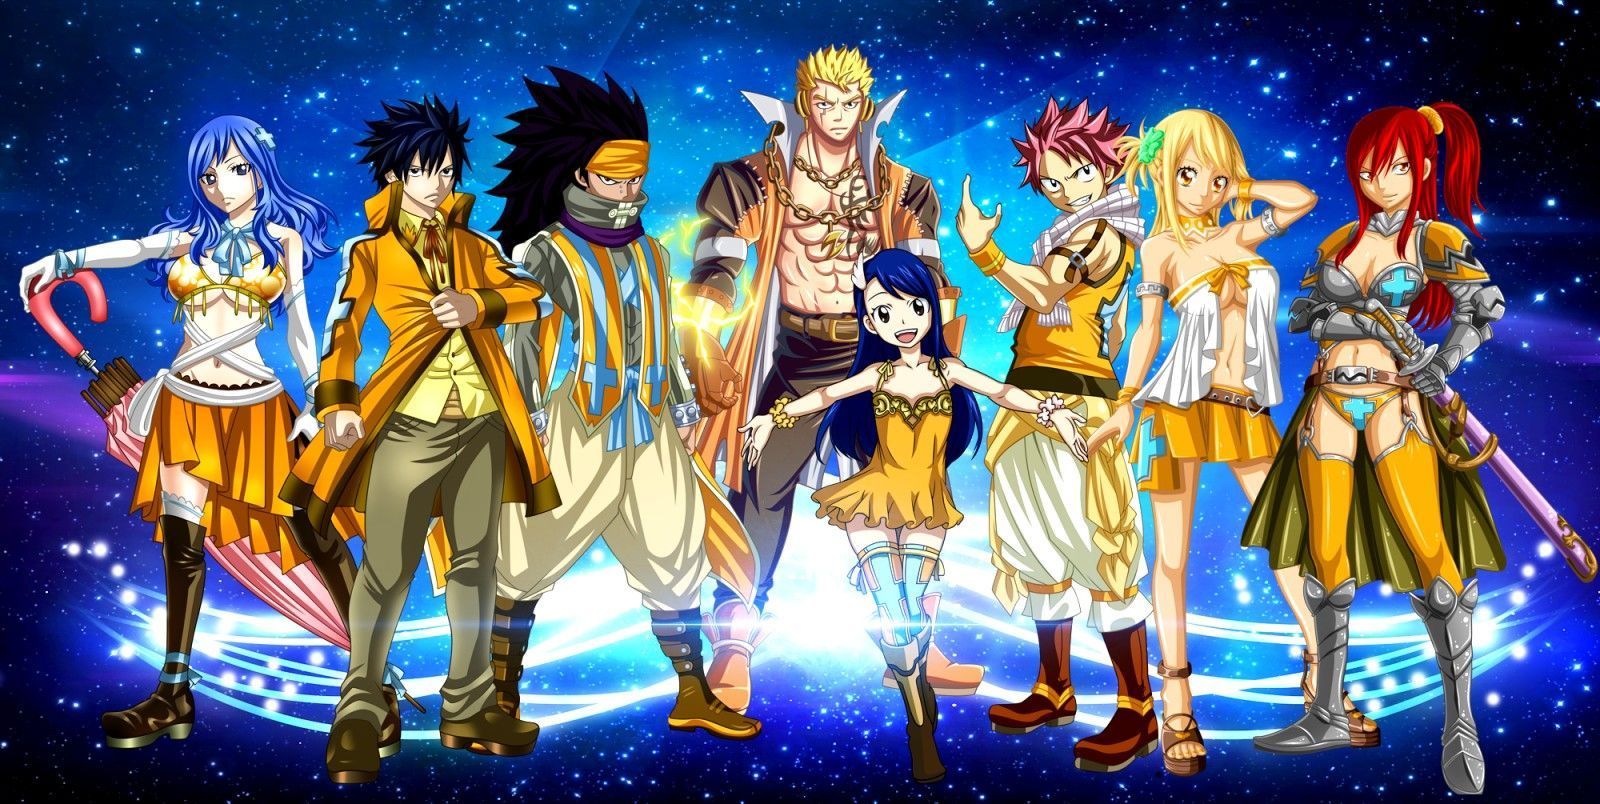 Download Fairy Tail Fantasia Hd Wallpaper Full HD Backgrounds